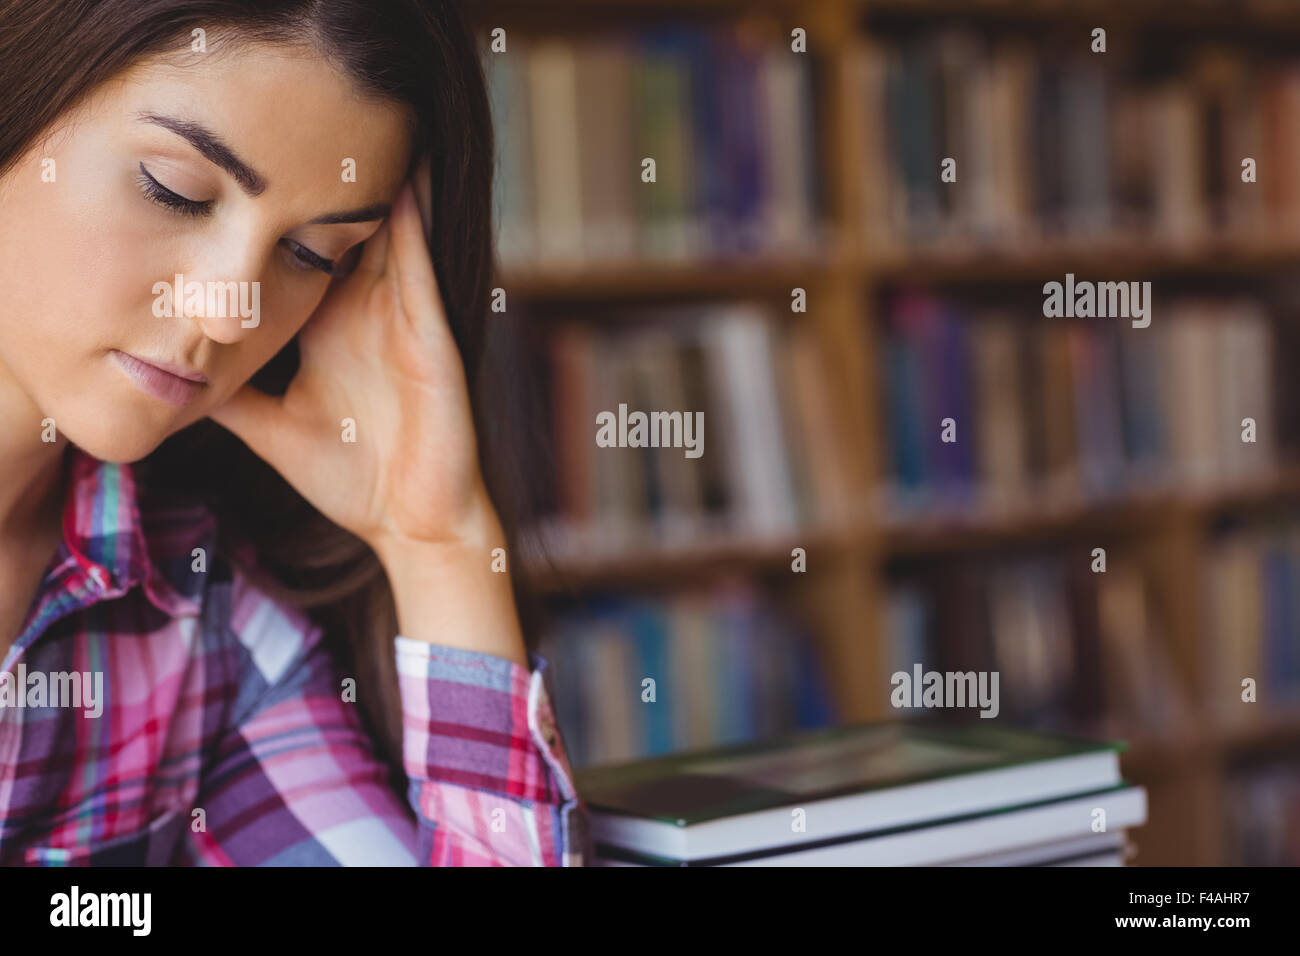 Concentrated female student studying Stock Photo